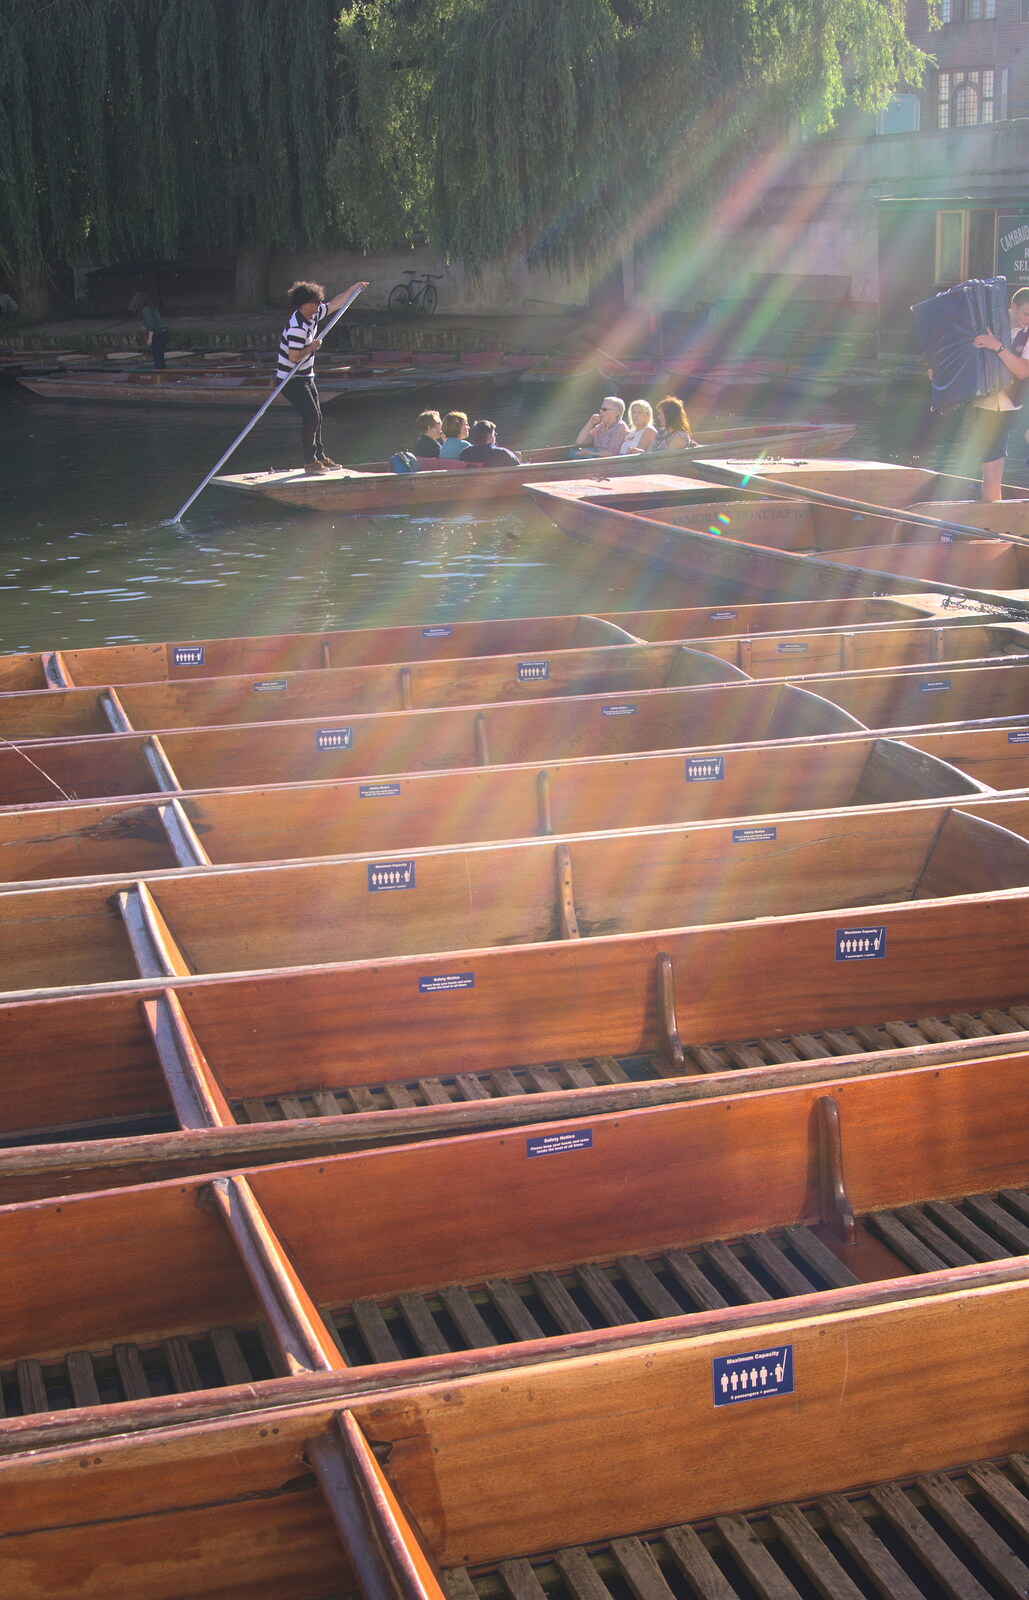 Punts in the evening sunshine from Back in the 'Bridge: an Anniversary, Cambridge - 3rd July 2016